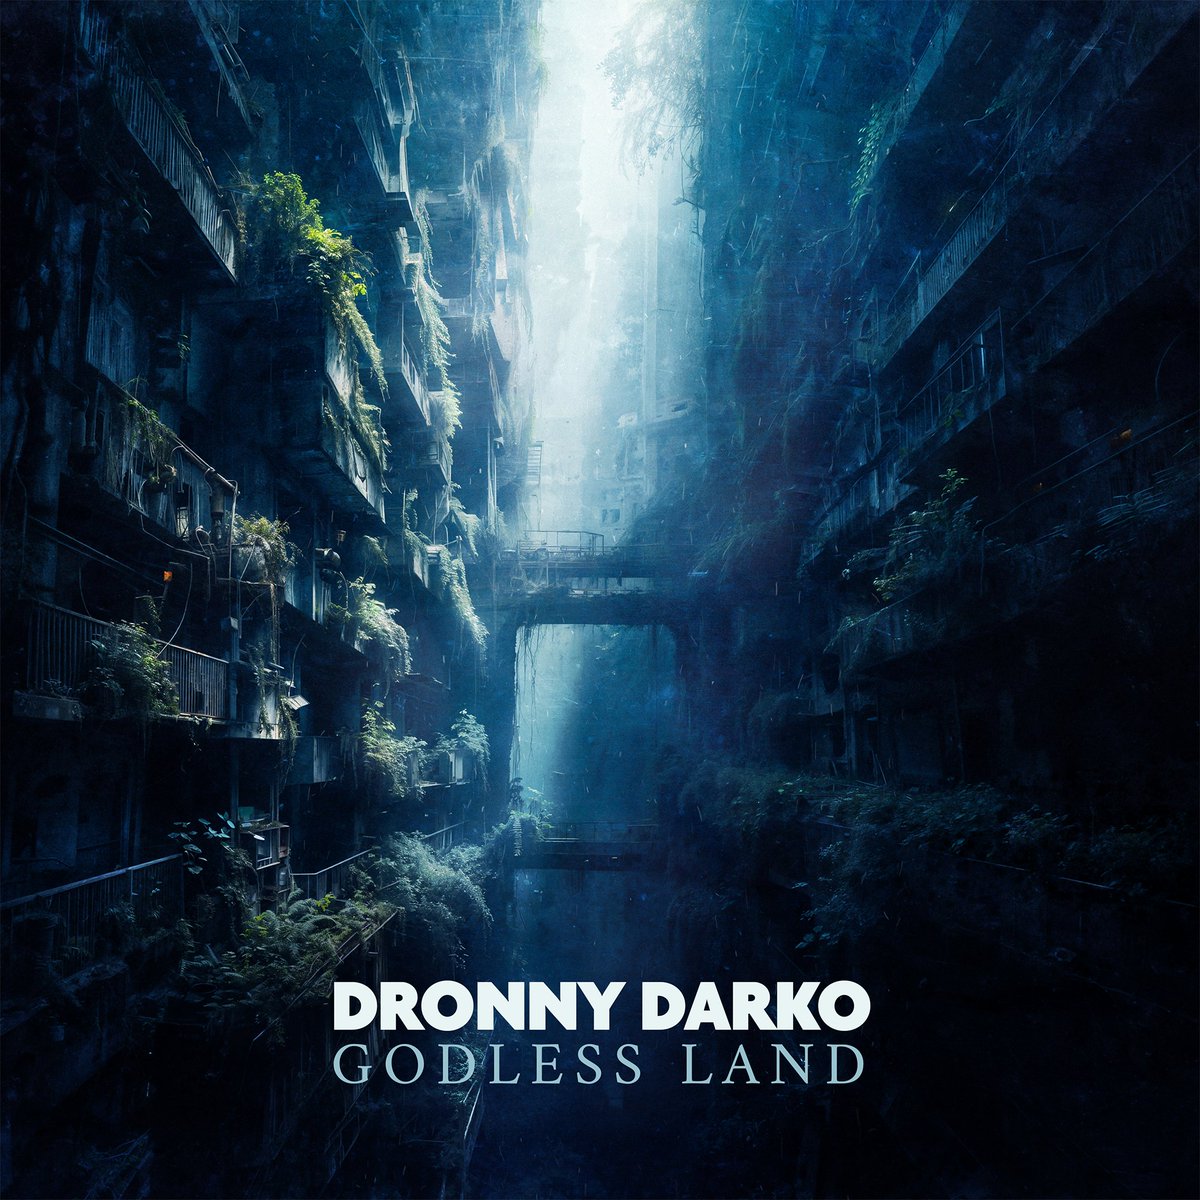 Dronny Darko  - Godless Land released on Bandcamp today: cryochamber.bandcamp.com/album/godless-…
#ambient #darkambient #Dystopia